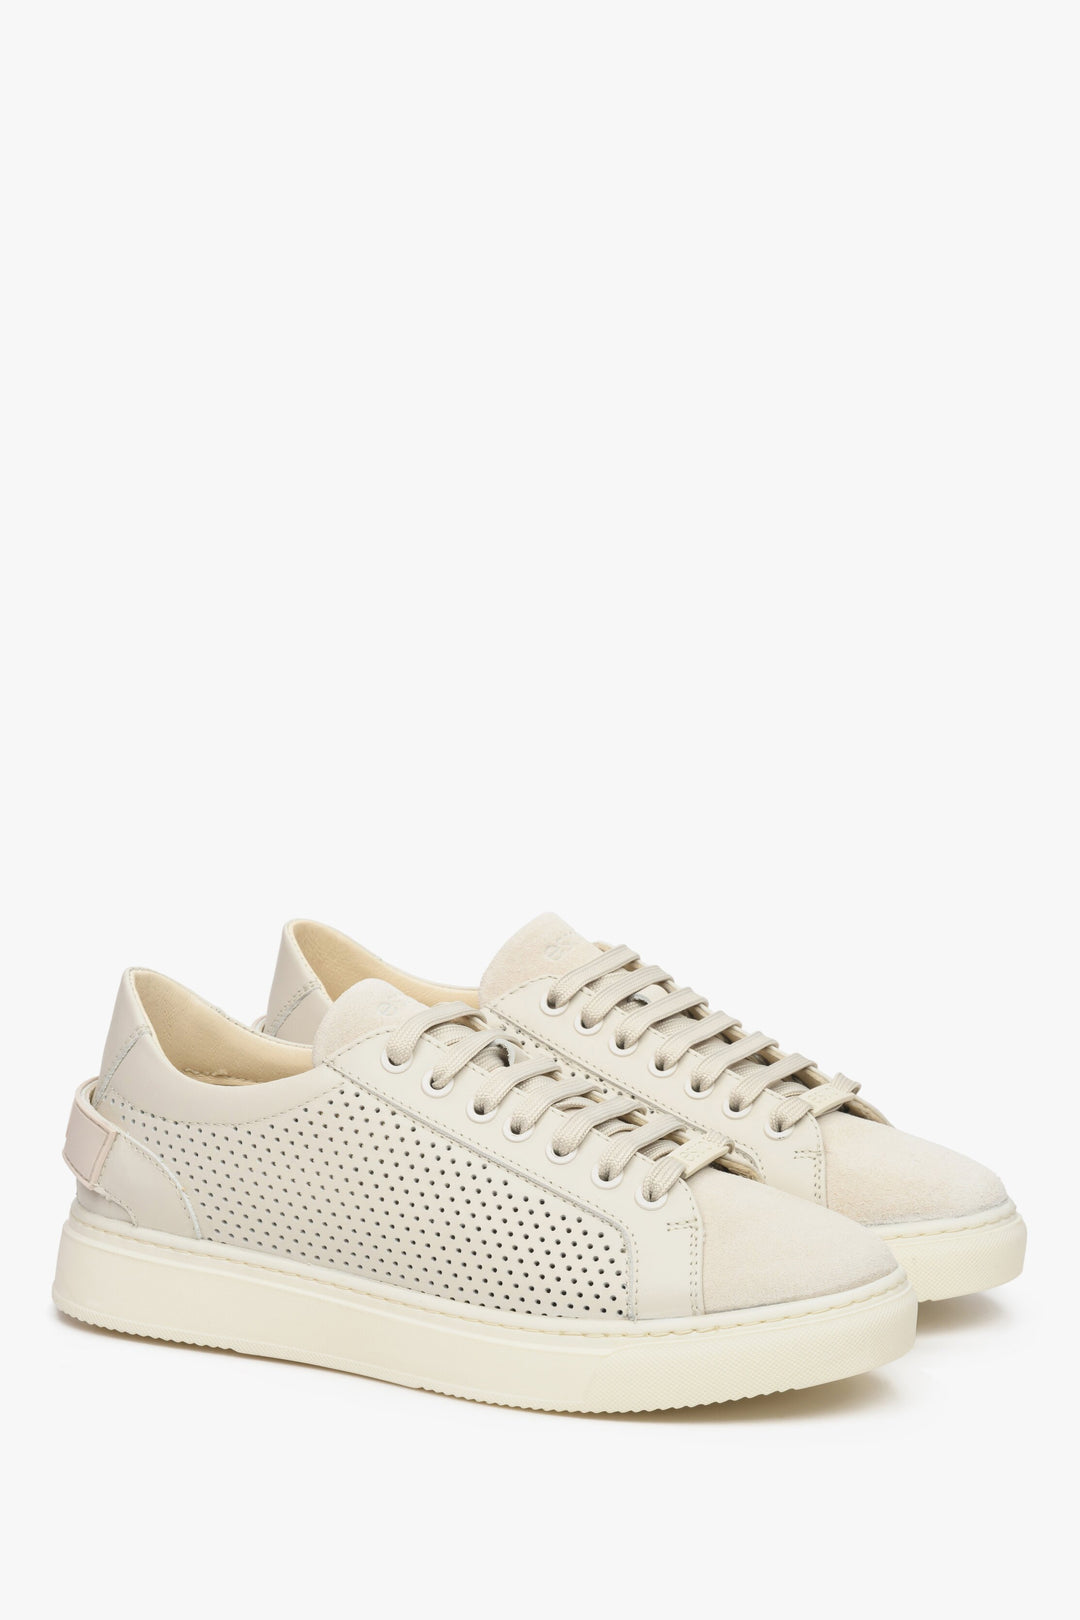 Women's beige leather Estro sneakers with perforation for fall/spring.